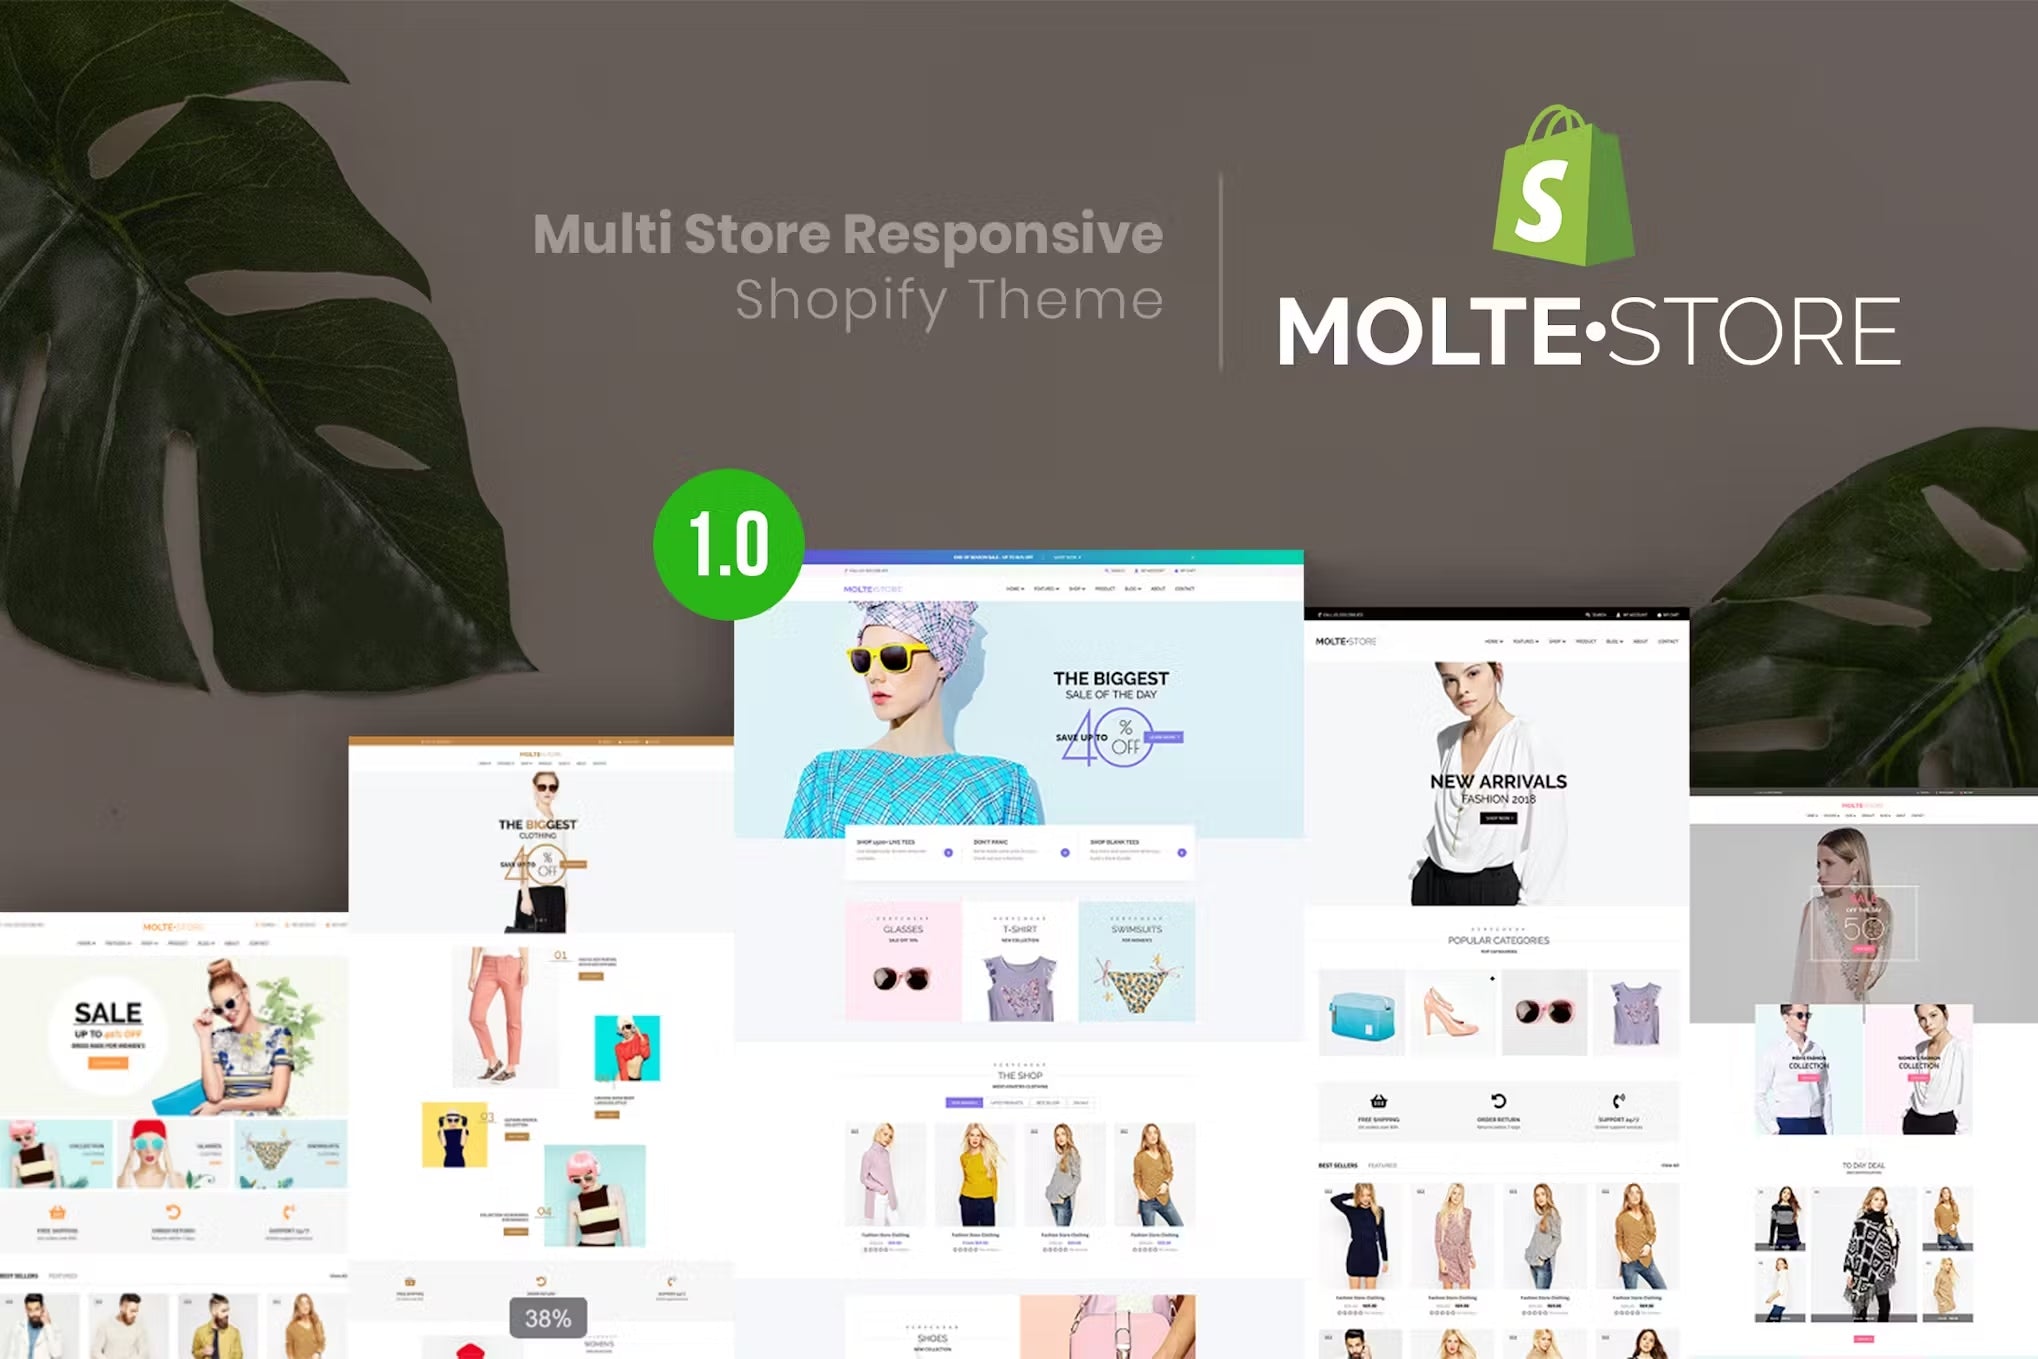 MolteStore - Multi Store Responsive Shopify Theme by exstore